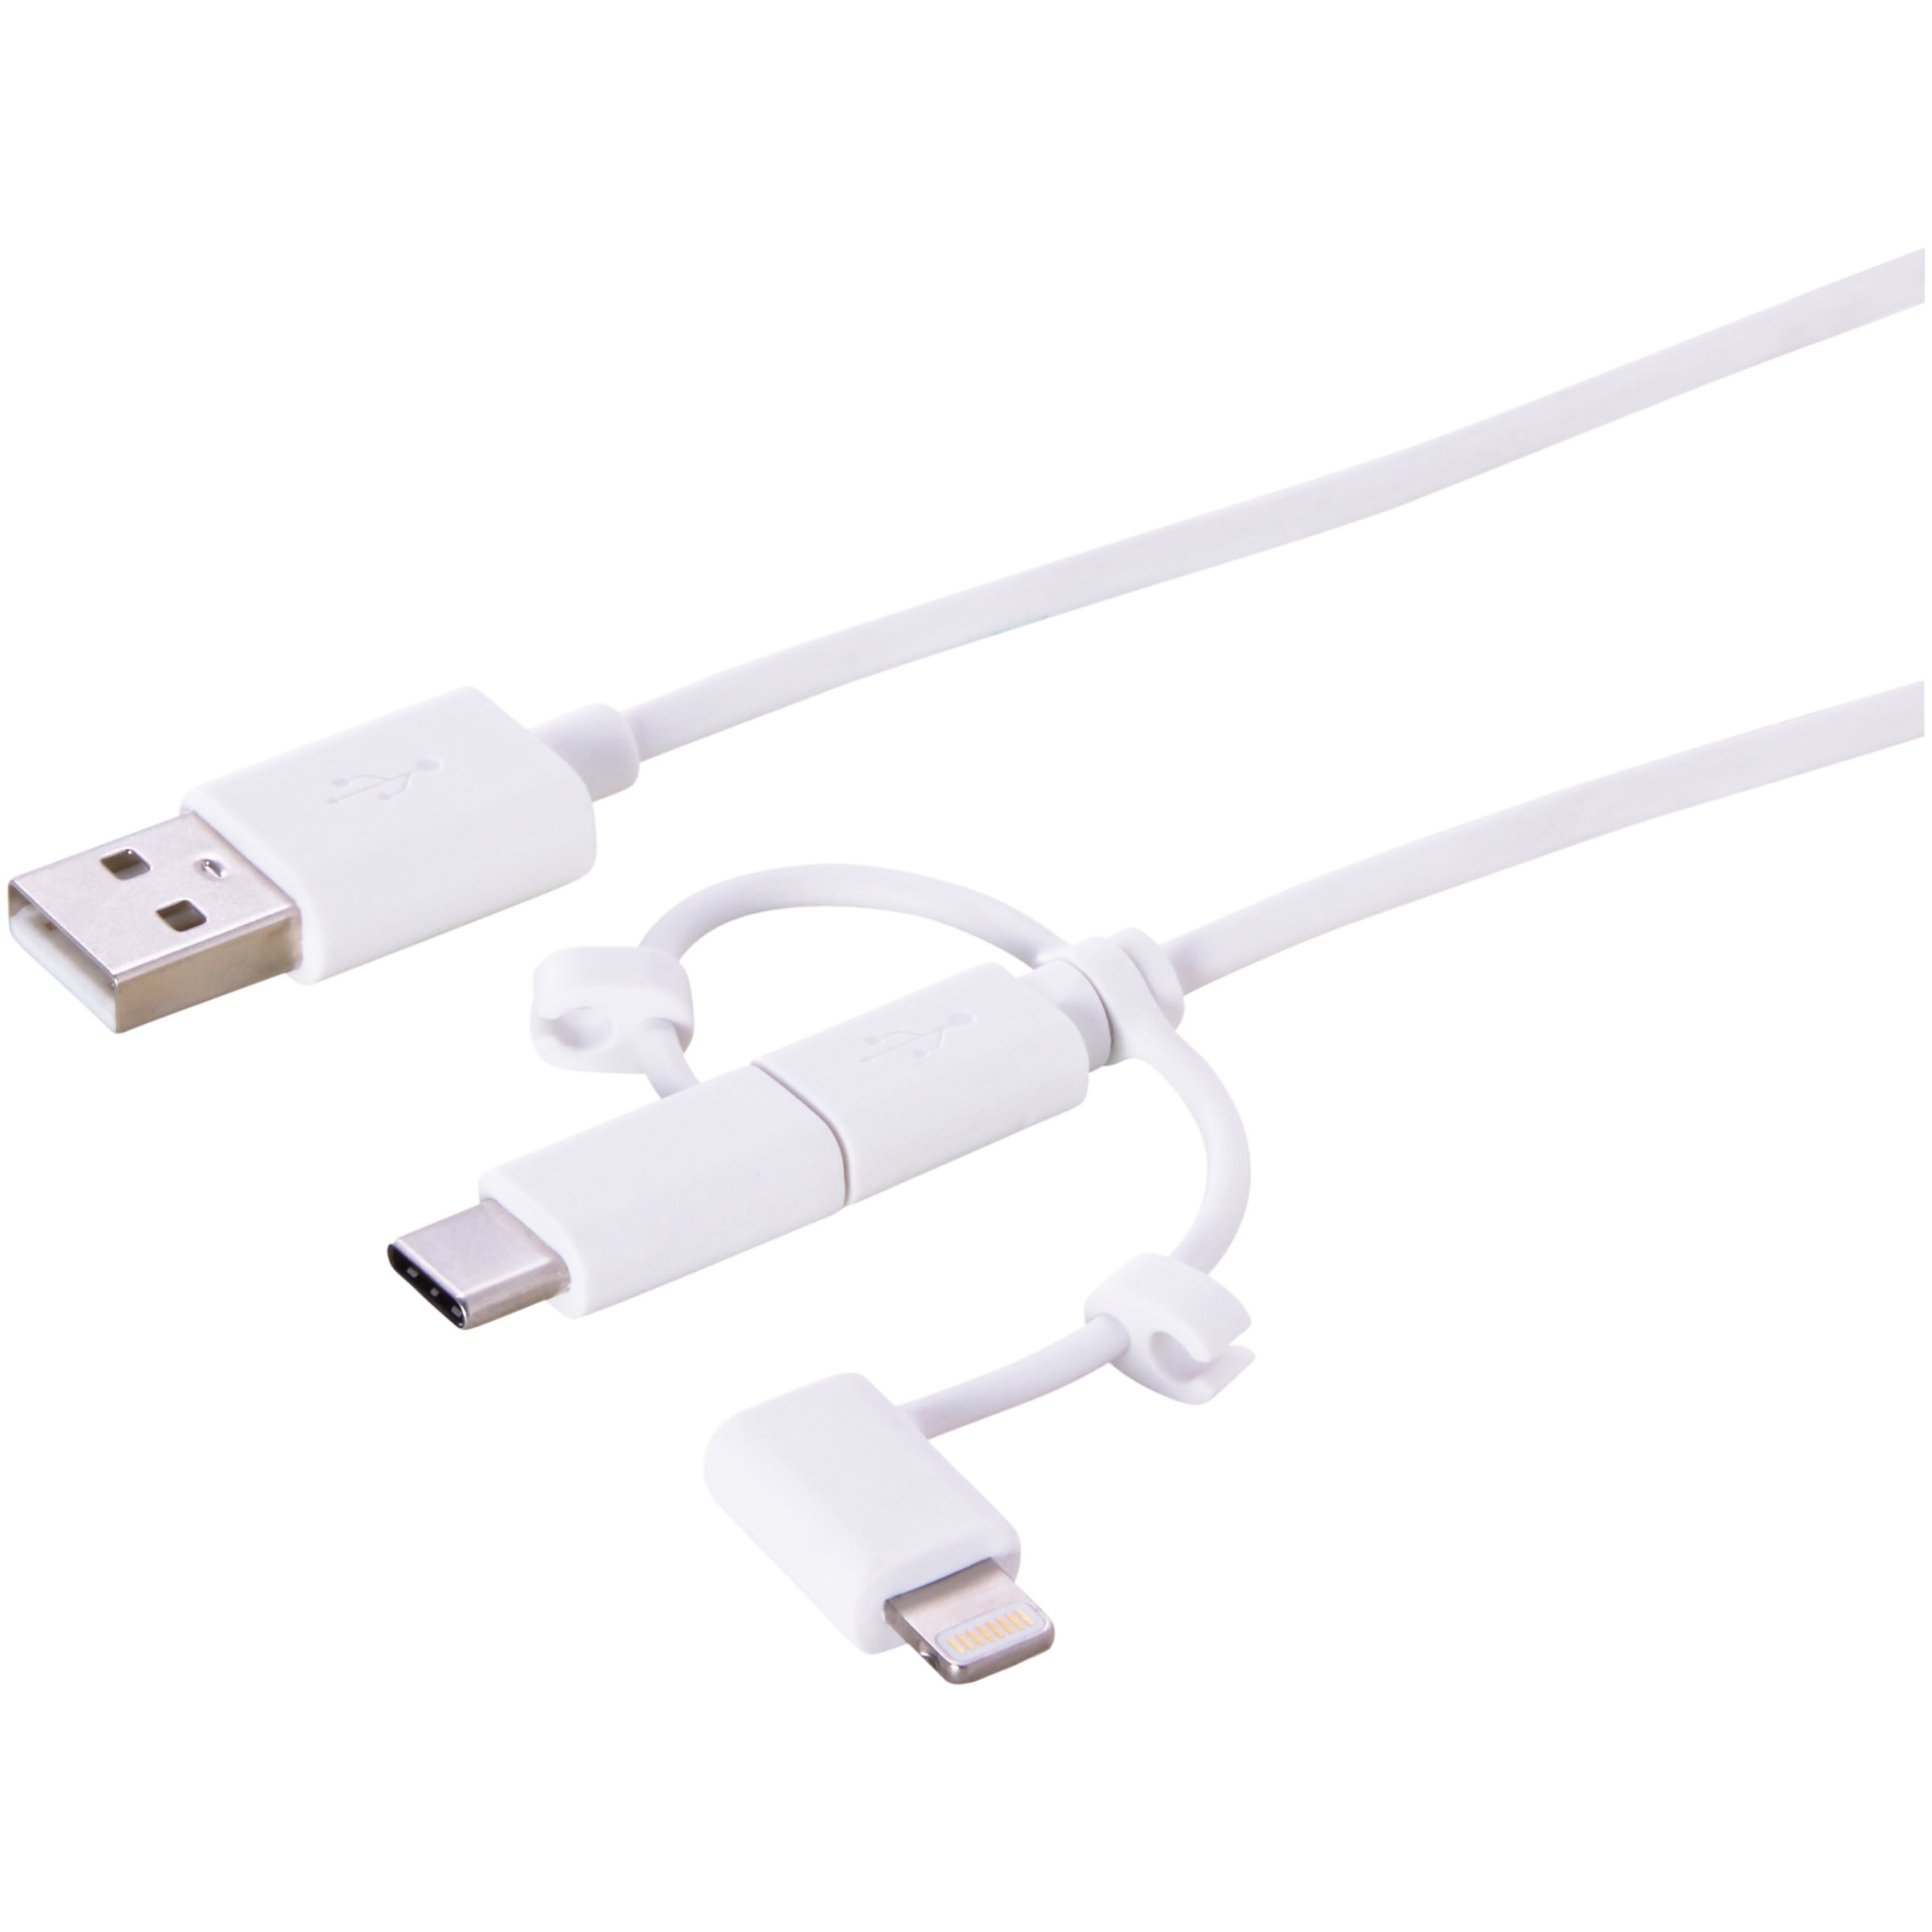 for Mobile Phones and Tablets Micro USB Port Connector Its A Beautiful Day to Save Lives Nurses Universal 3 in 1 Multi-Purpose USB Cable Charging Cable Adapter 